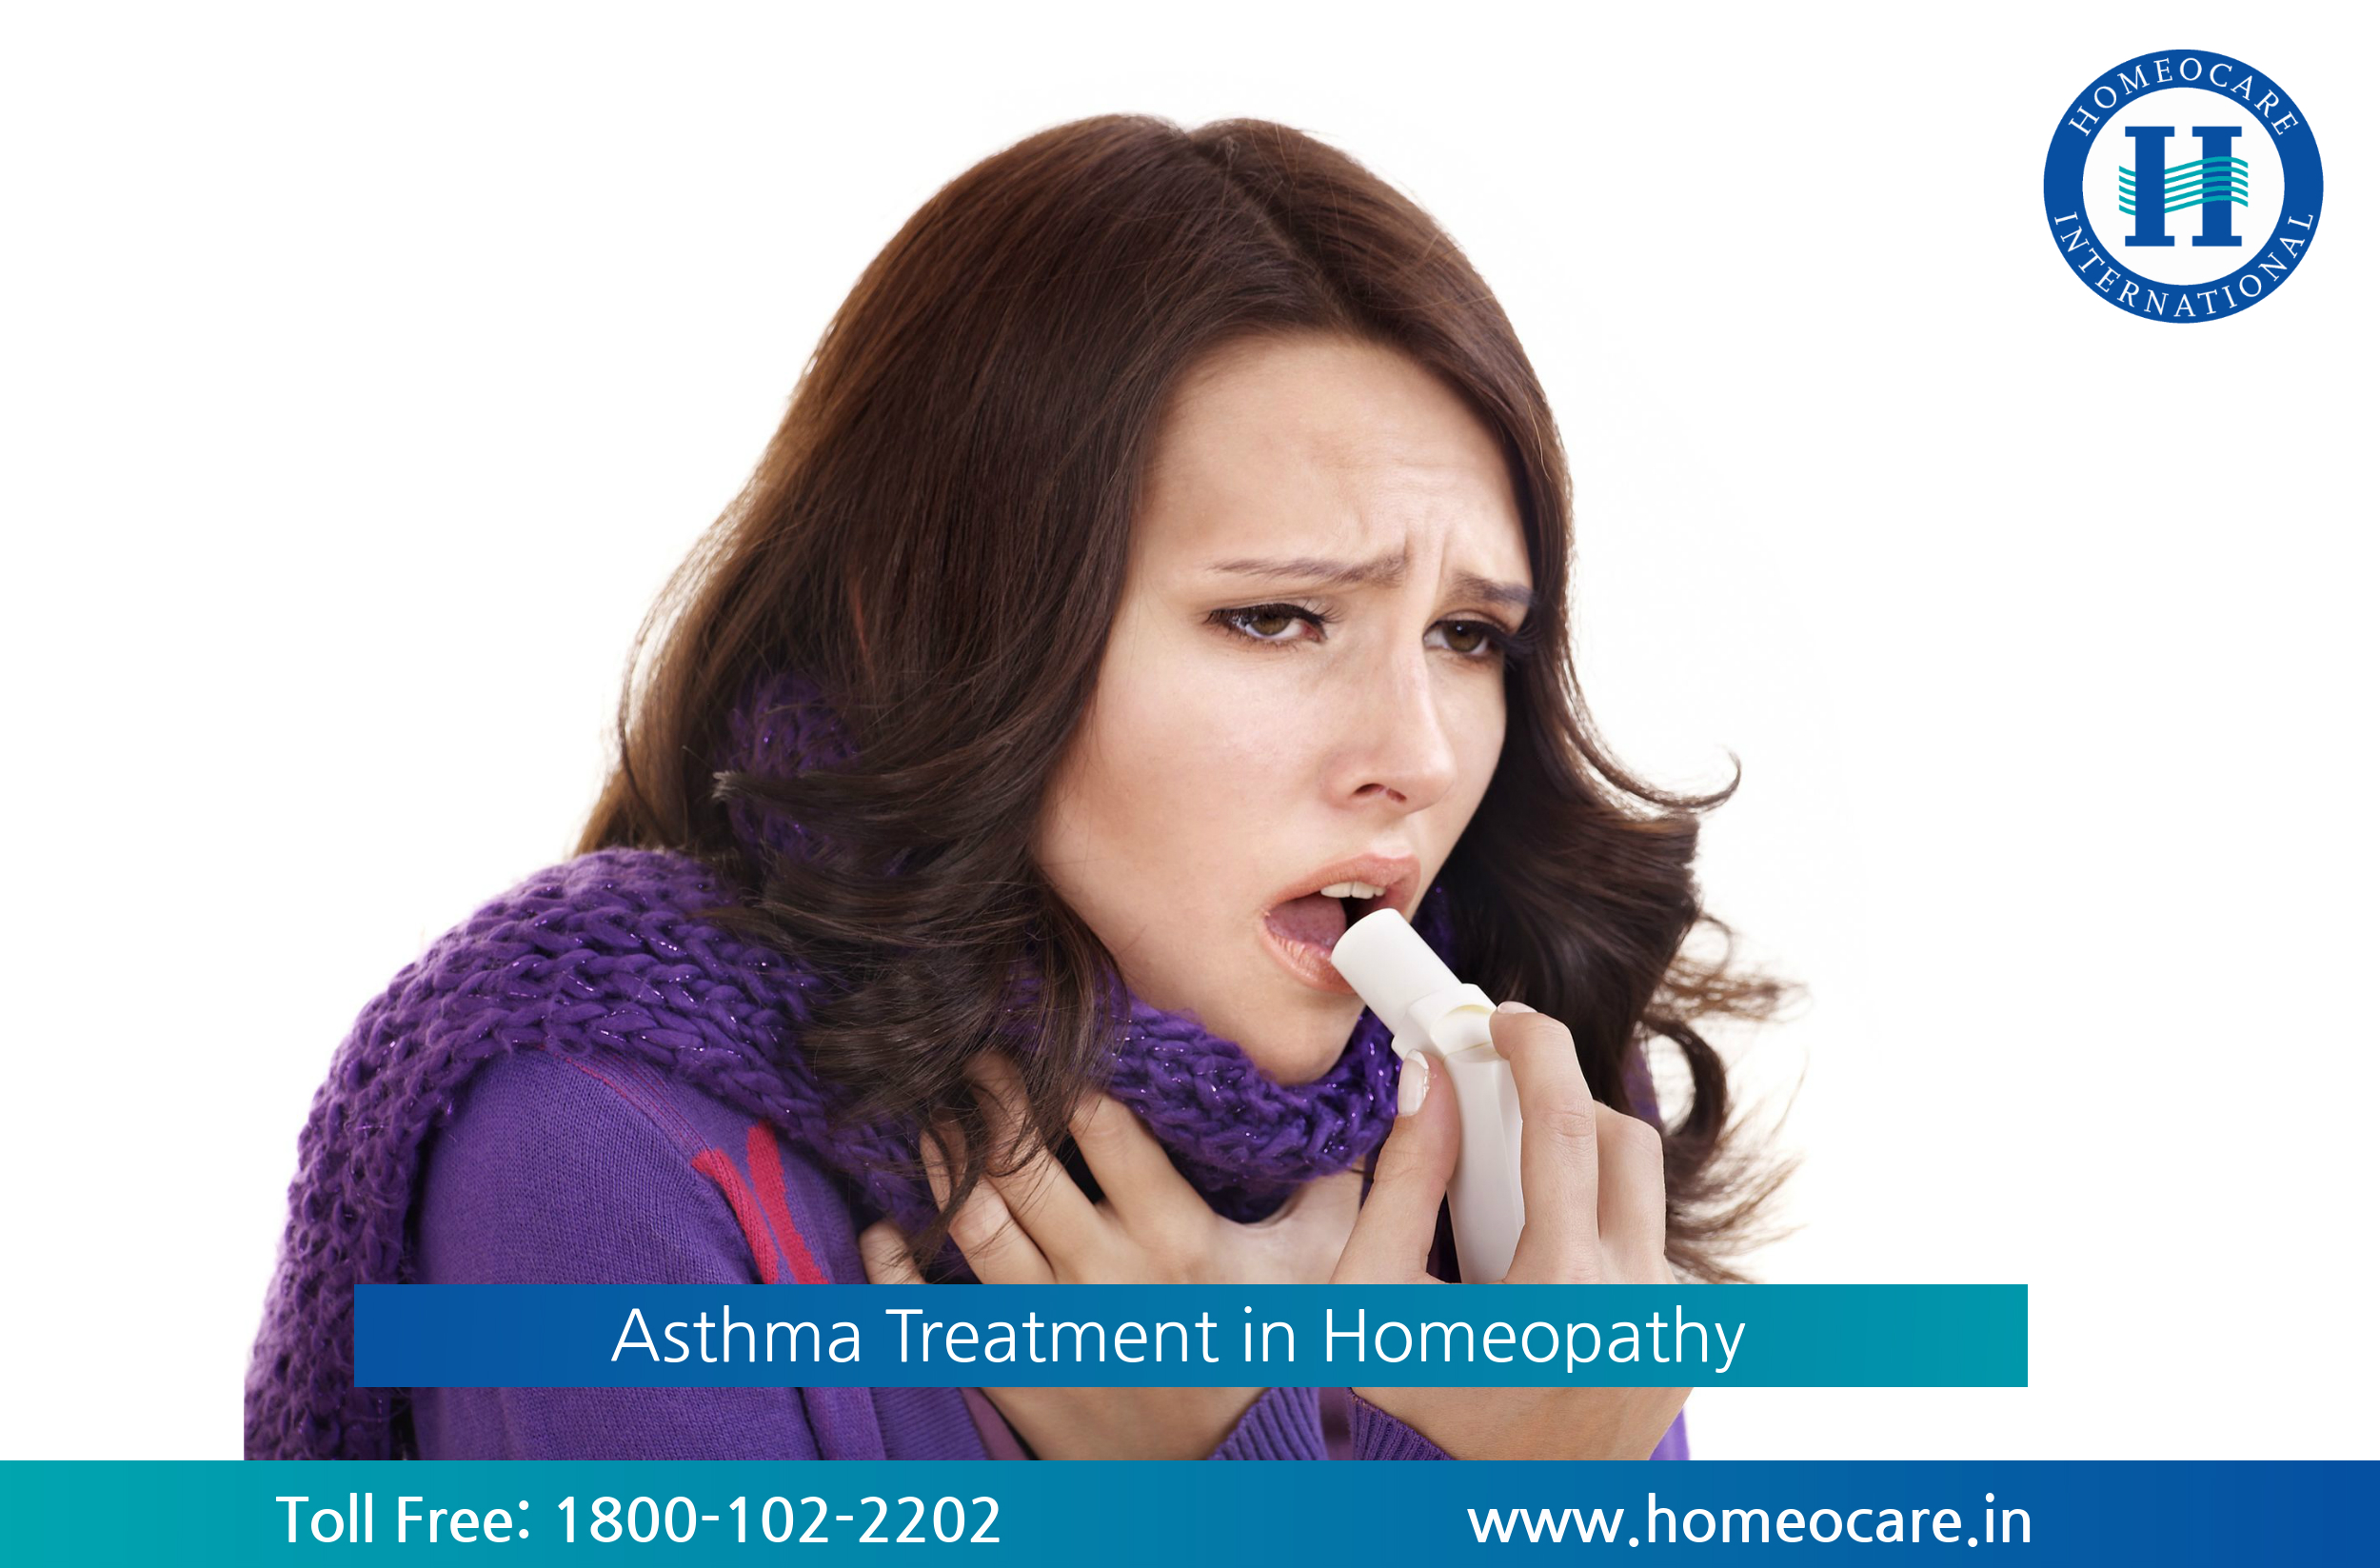 Asthma-Treatment-in-Homeopathy